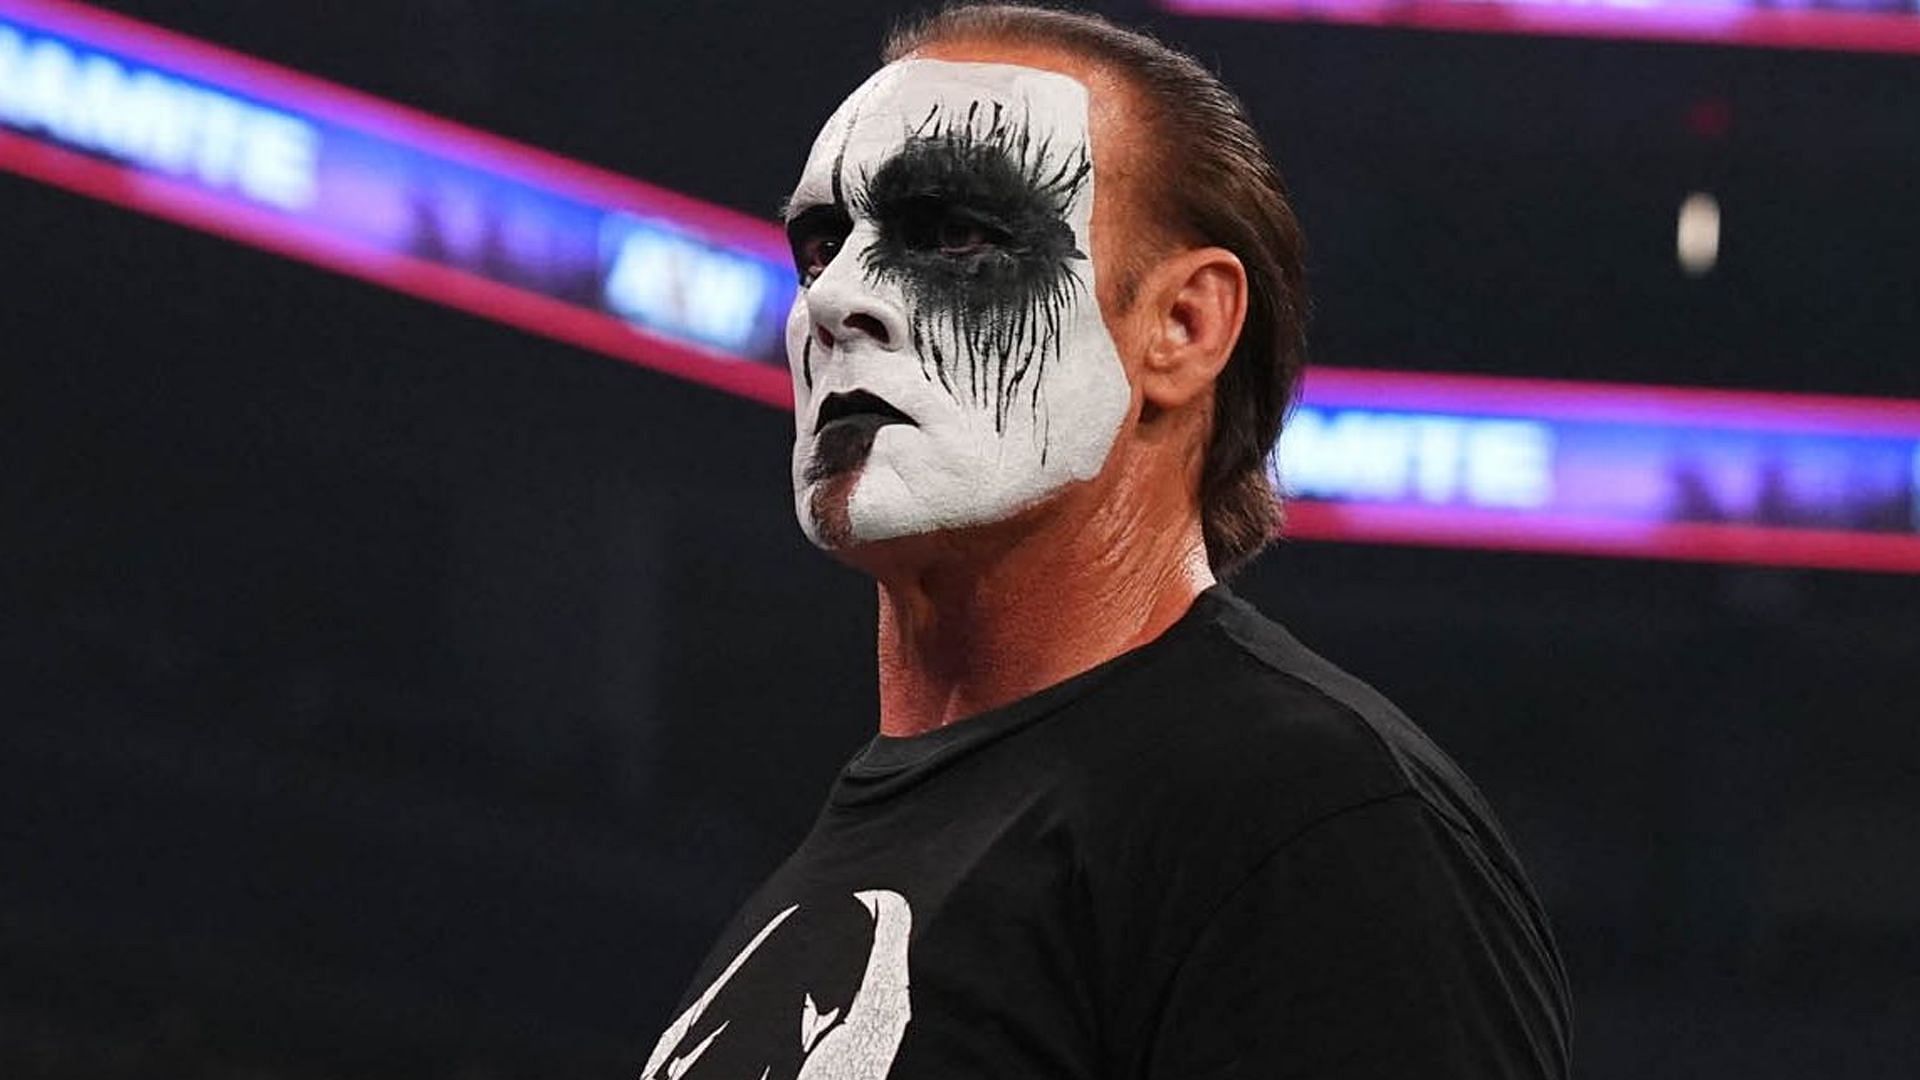 Sting during one of his AEW appearances